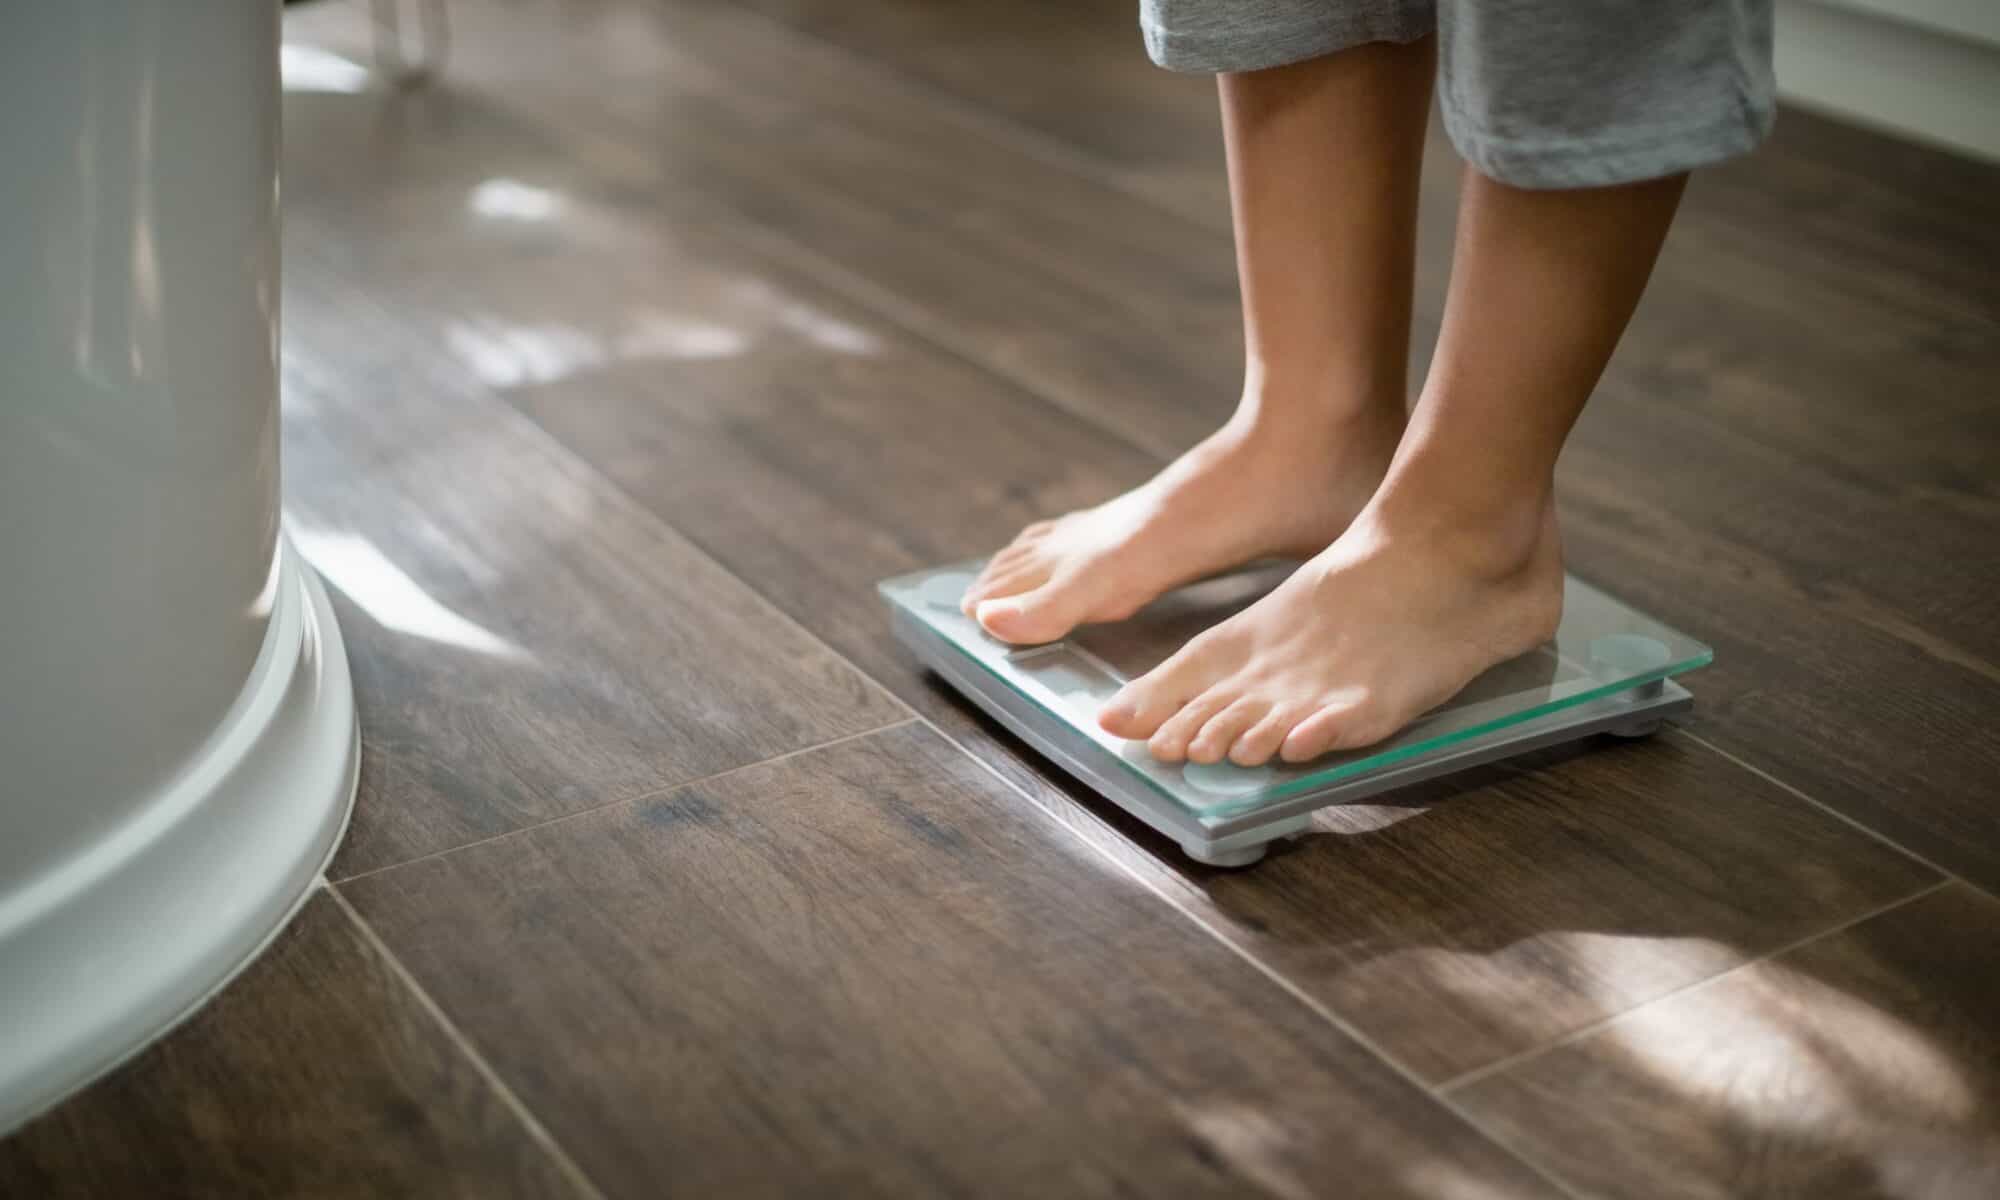 feet standing on weight scale in bathroom